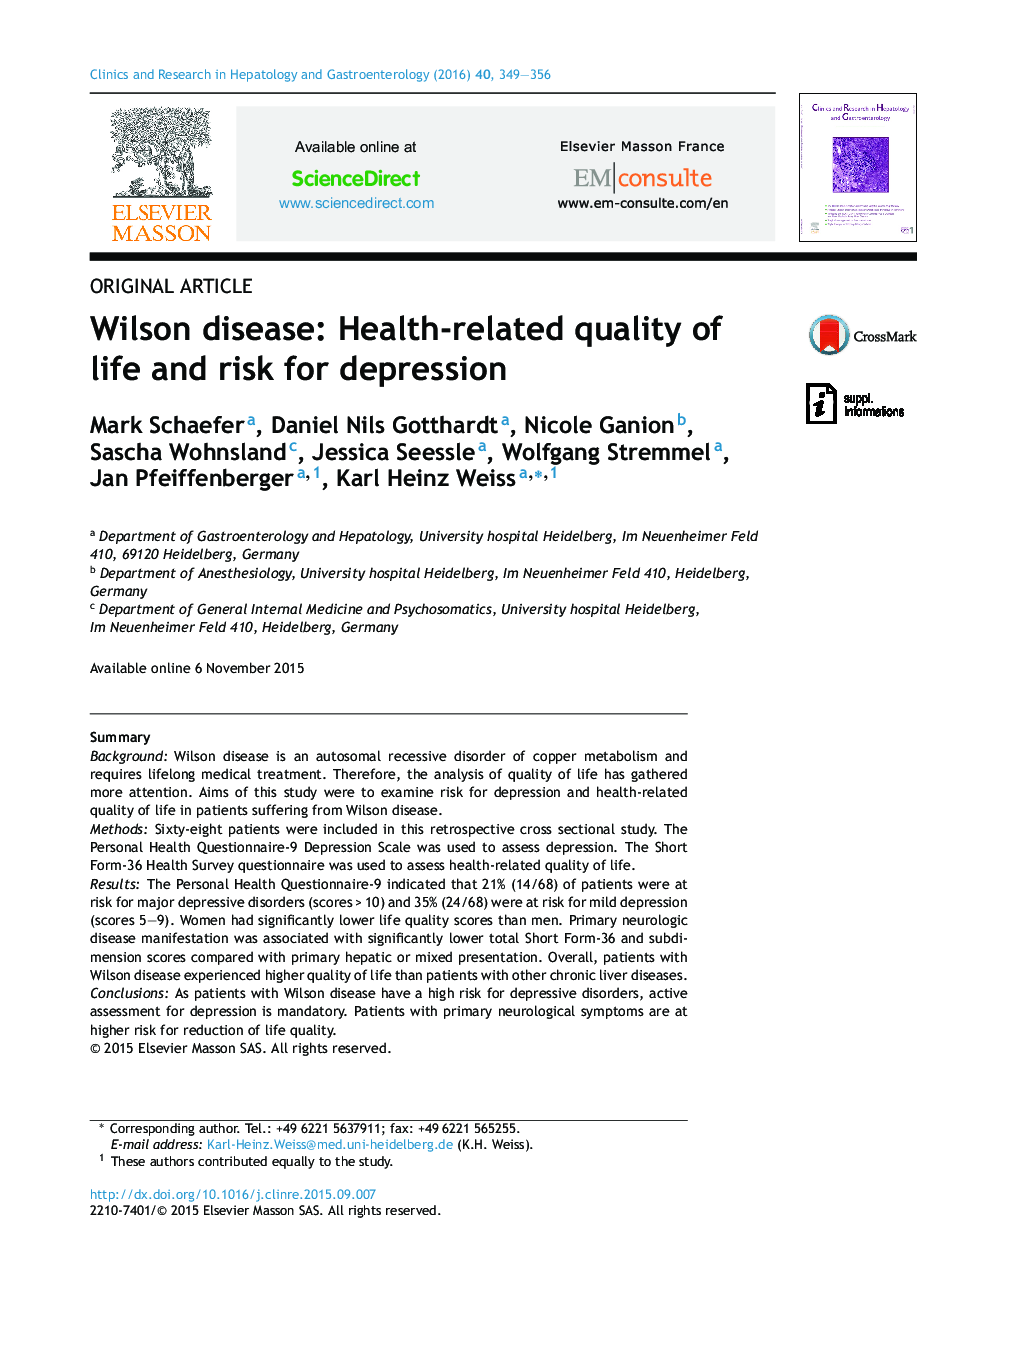 Wilson disease: Health-related quality of life and risk for depression